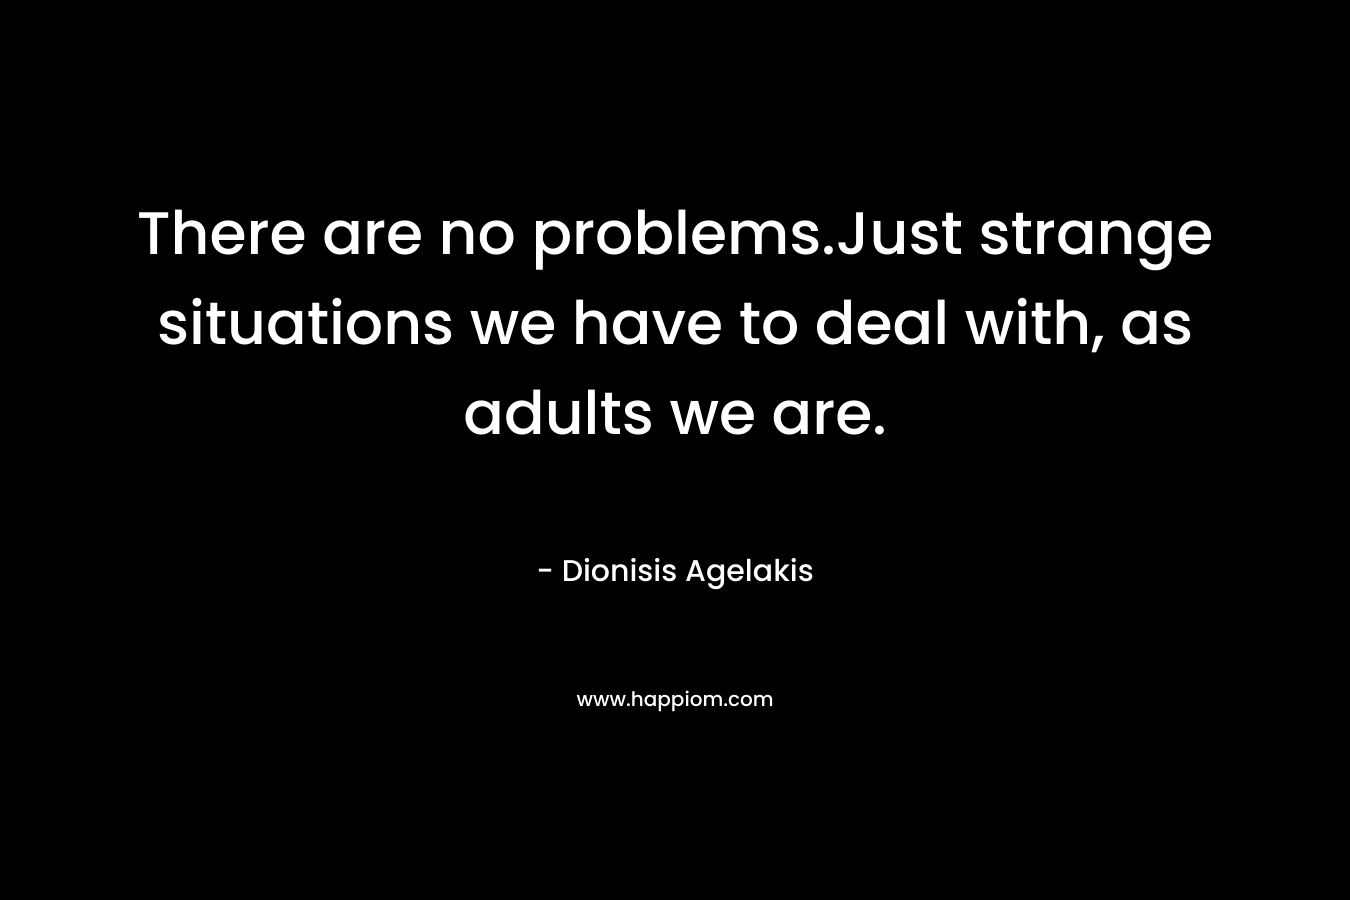 There are no problems.Just strange situations we have to deal with, as adults we are. – Dionisis Agelakis